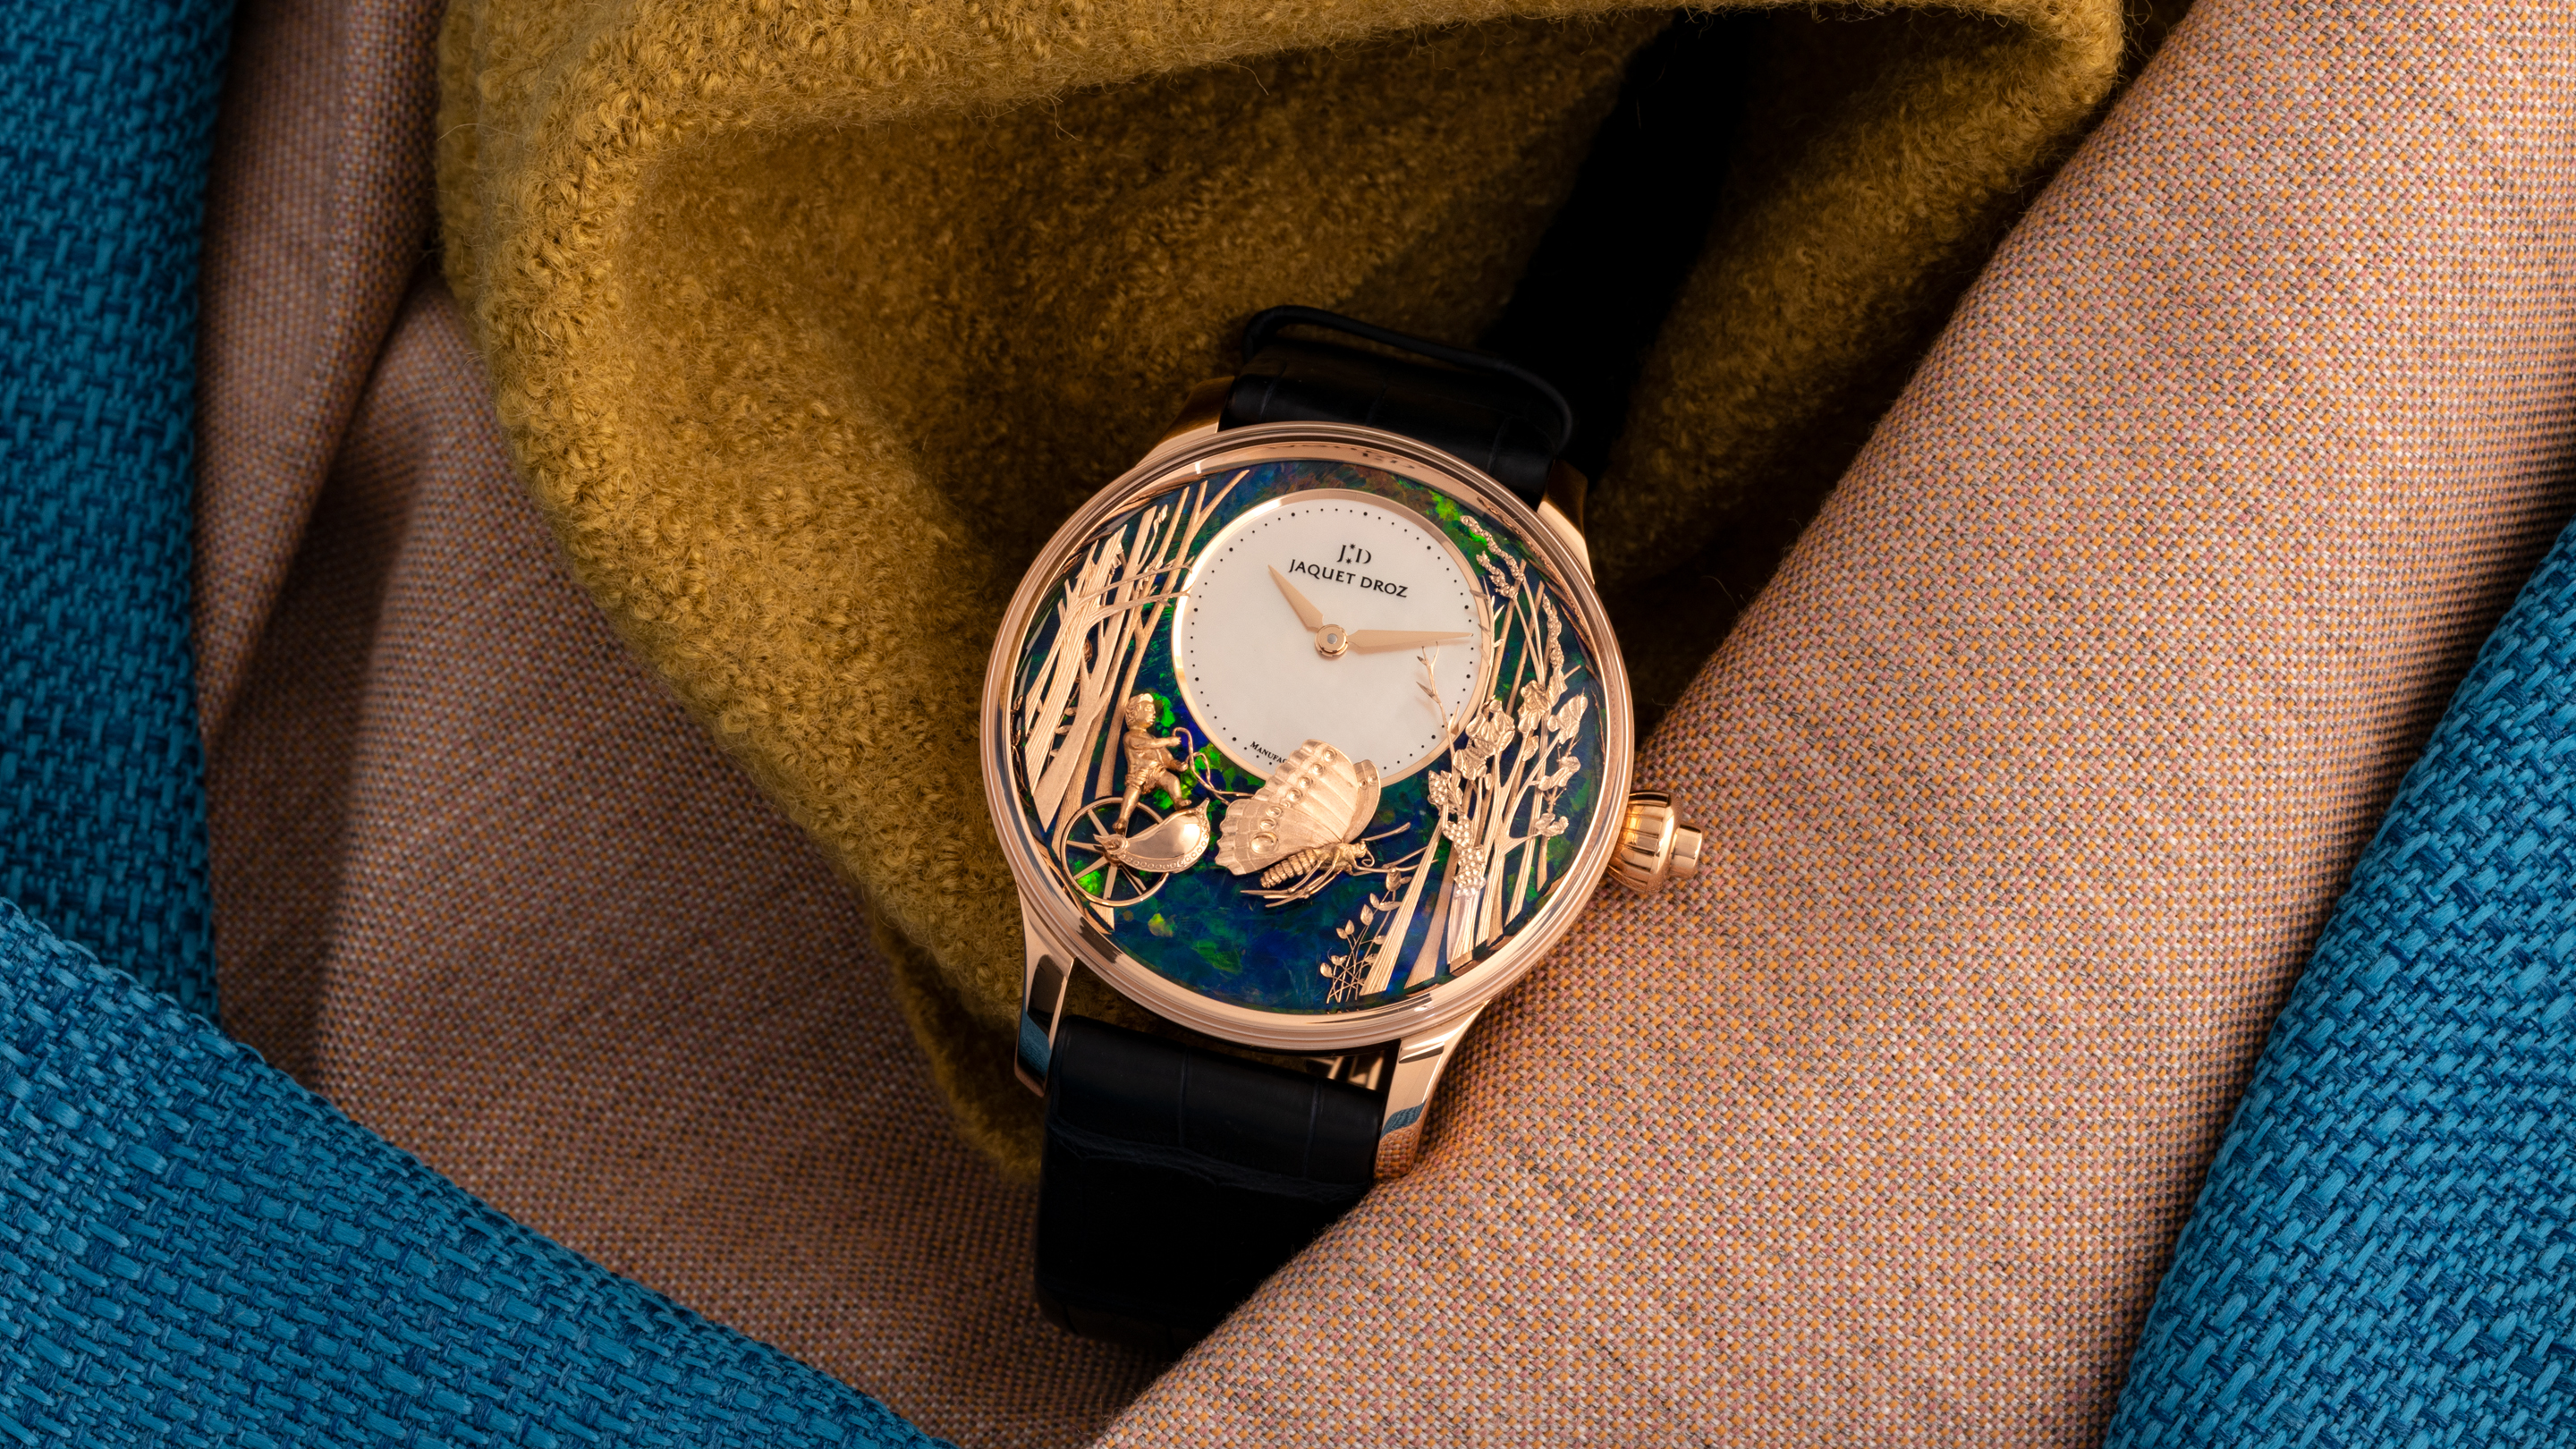 In-Depth: The Jaquet Droz Loving Butterfly Automaton, A Legend